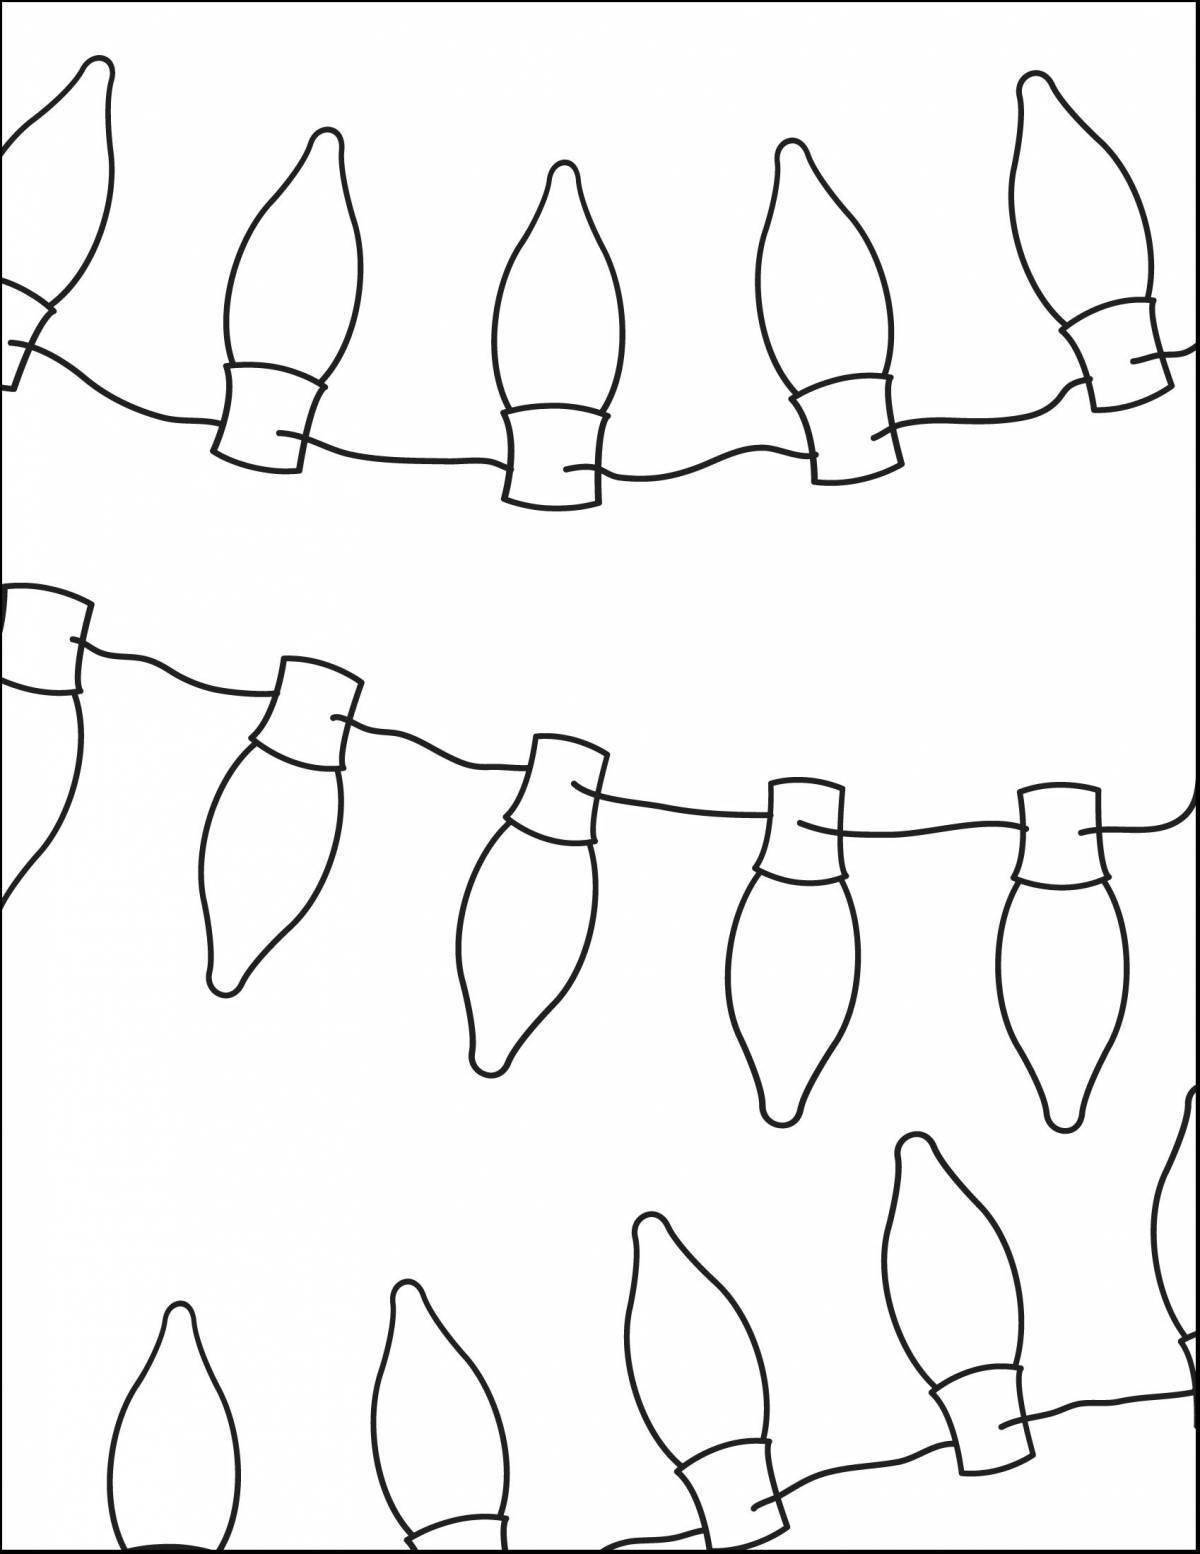 Glowing Christmas garland coloring page